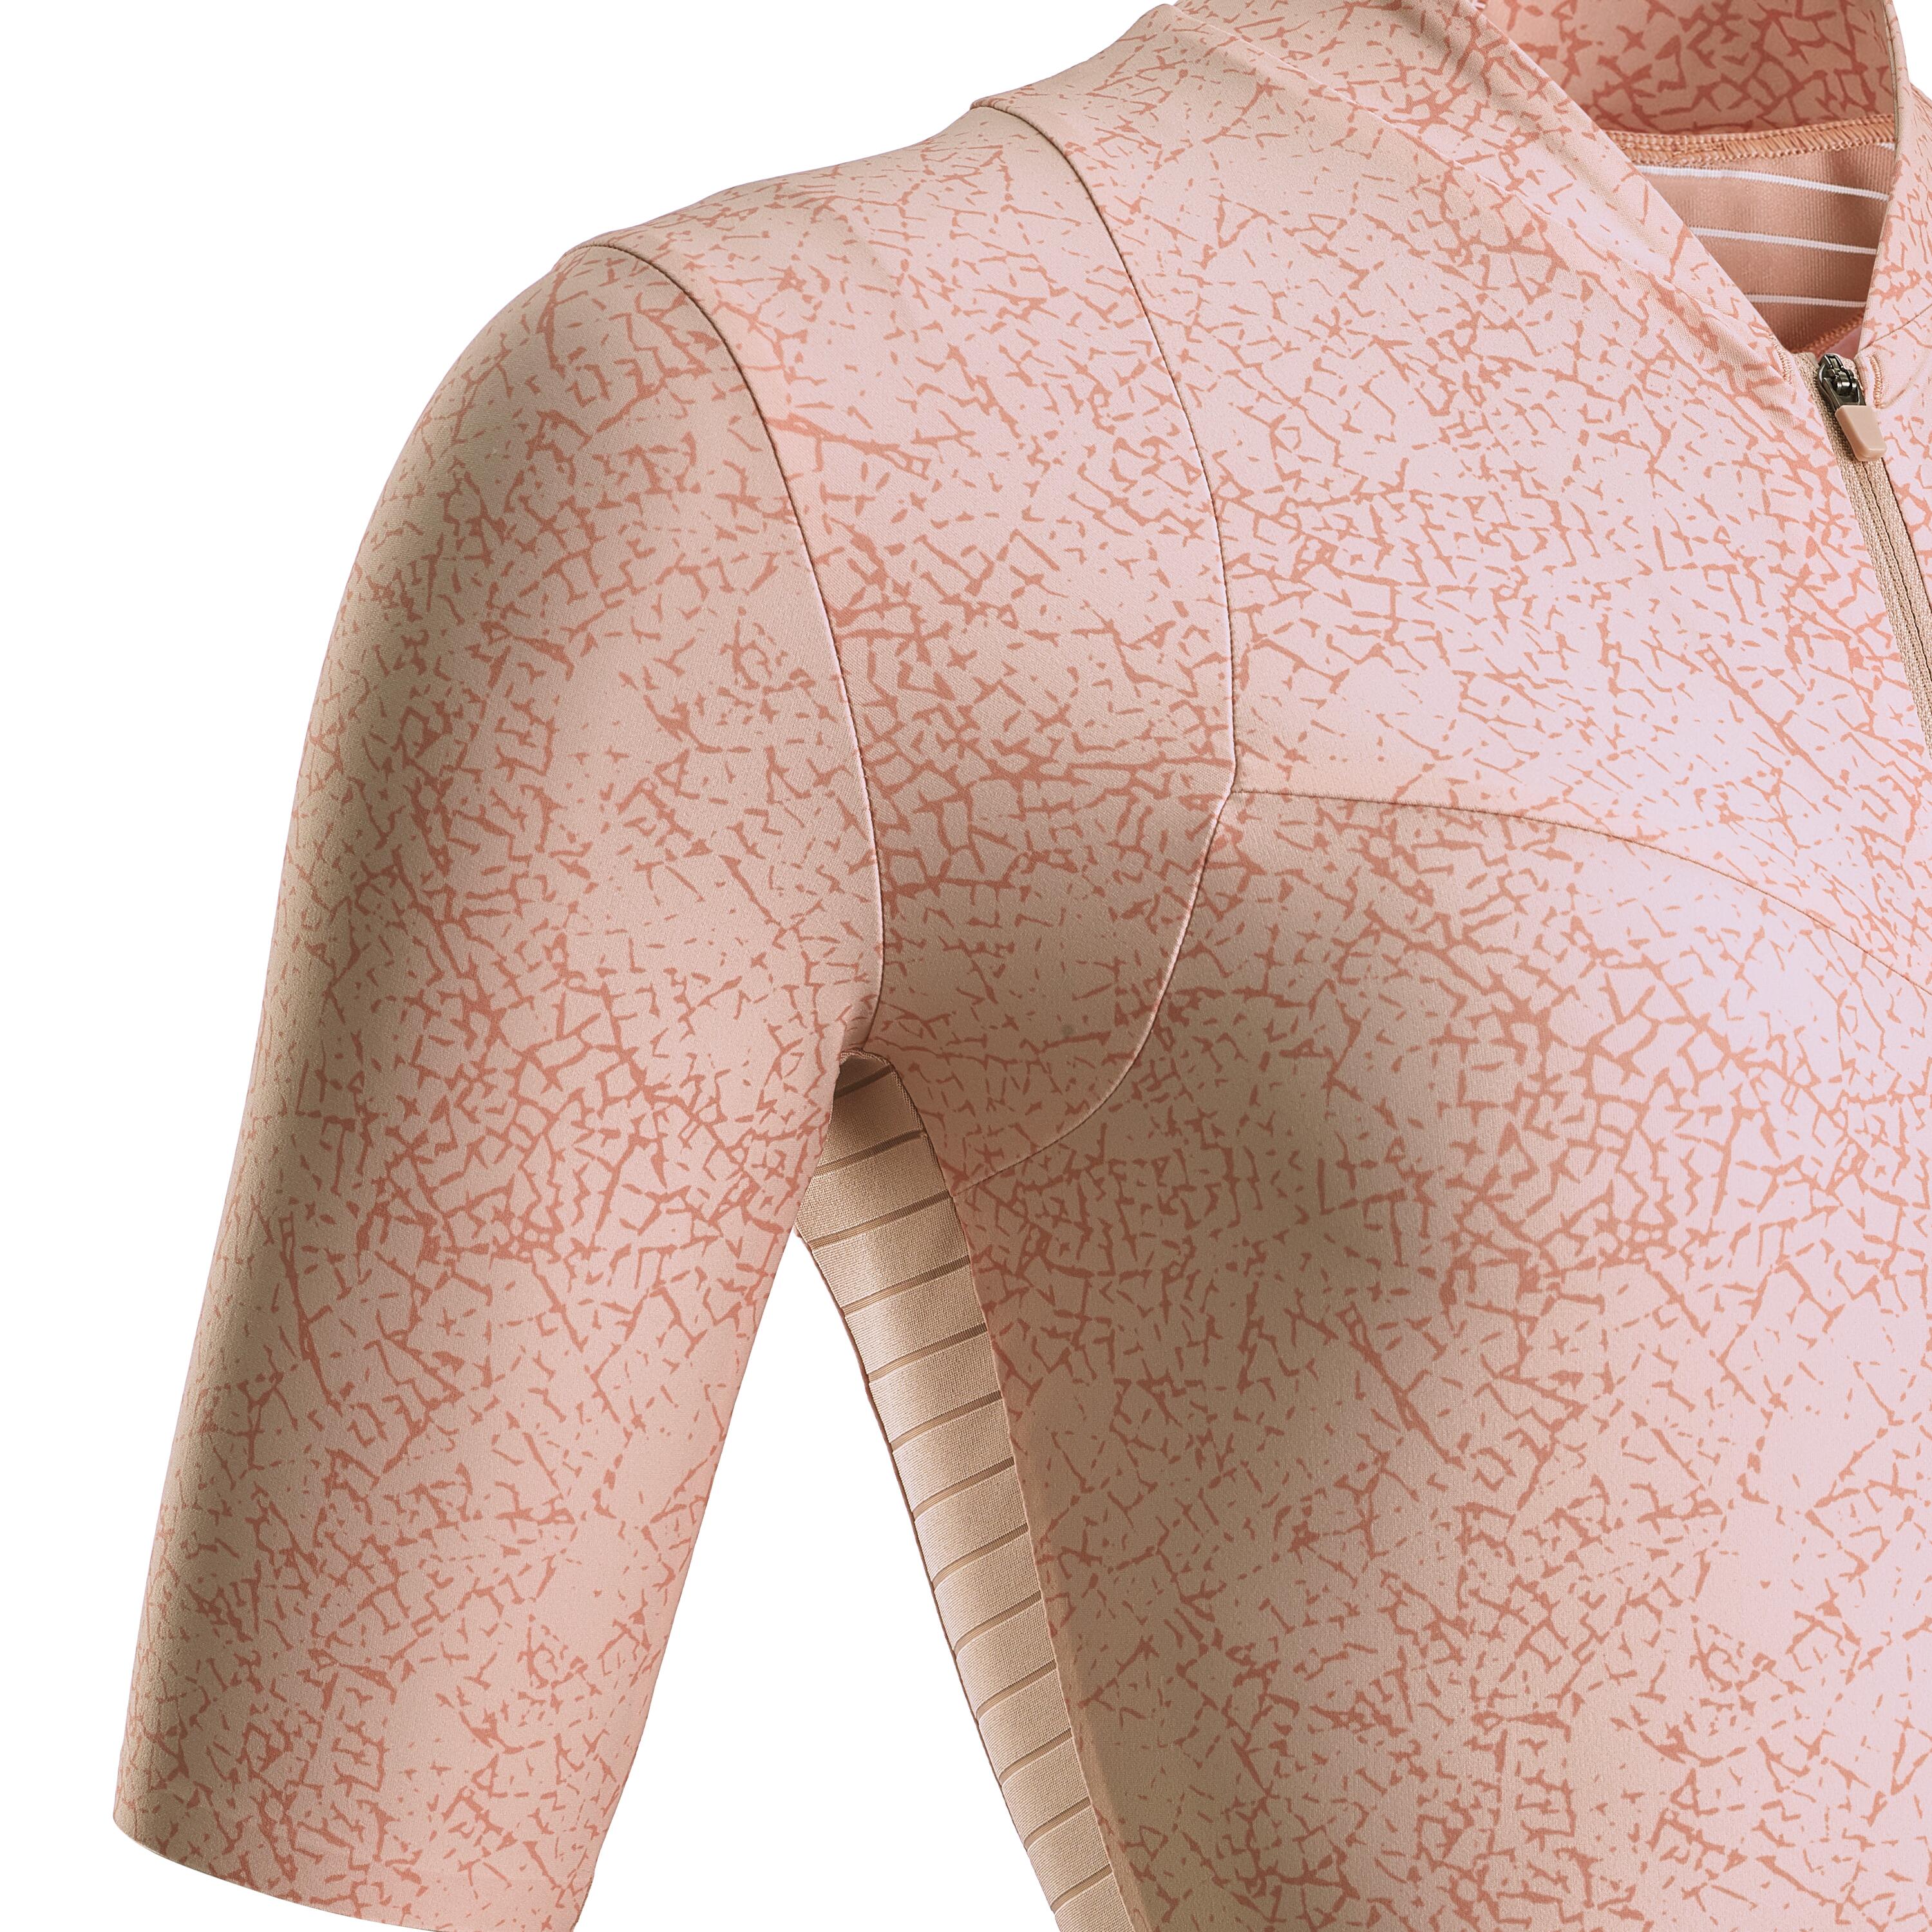 Women's Short-Sleeved Road Cycling Jersey Racer - Cracked Pink 5/5